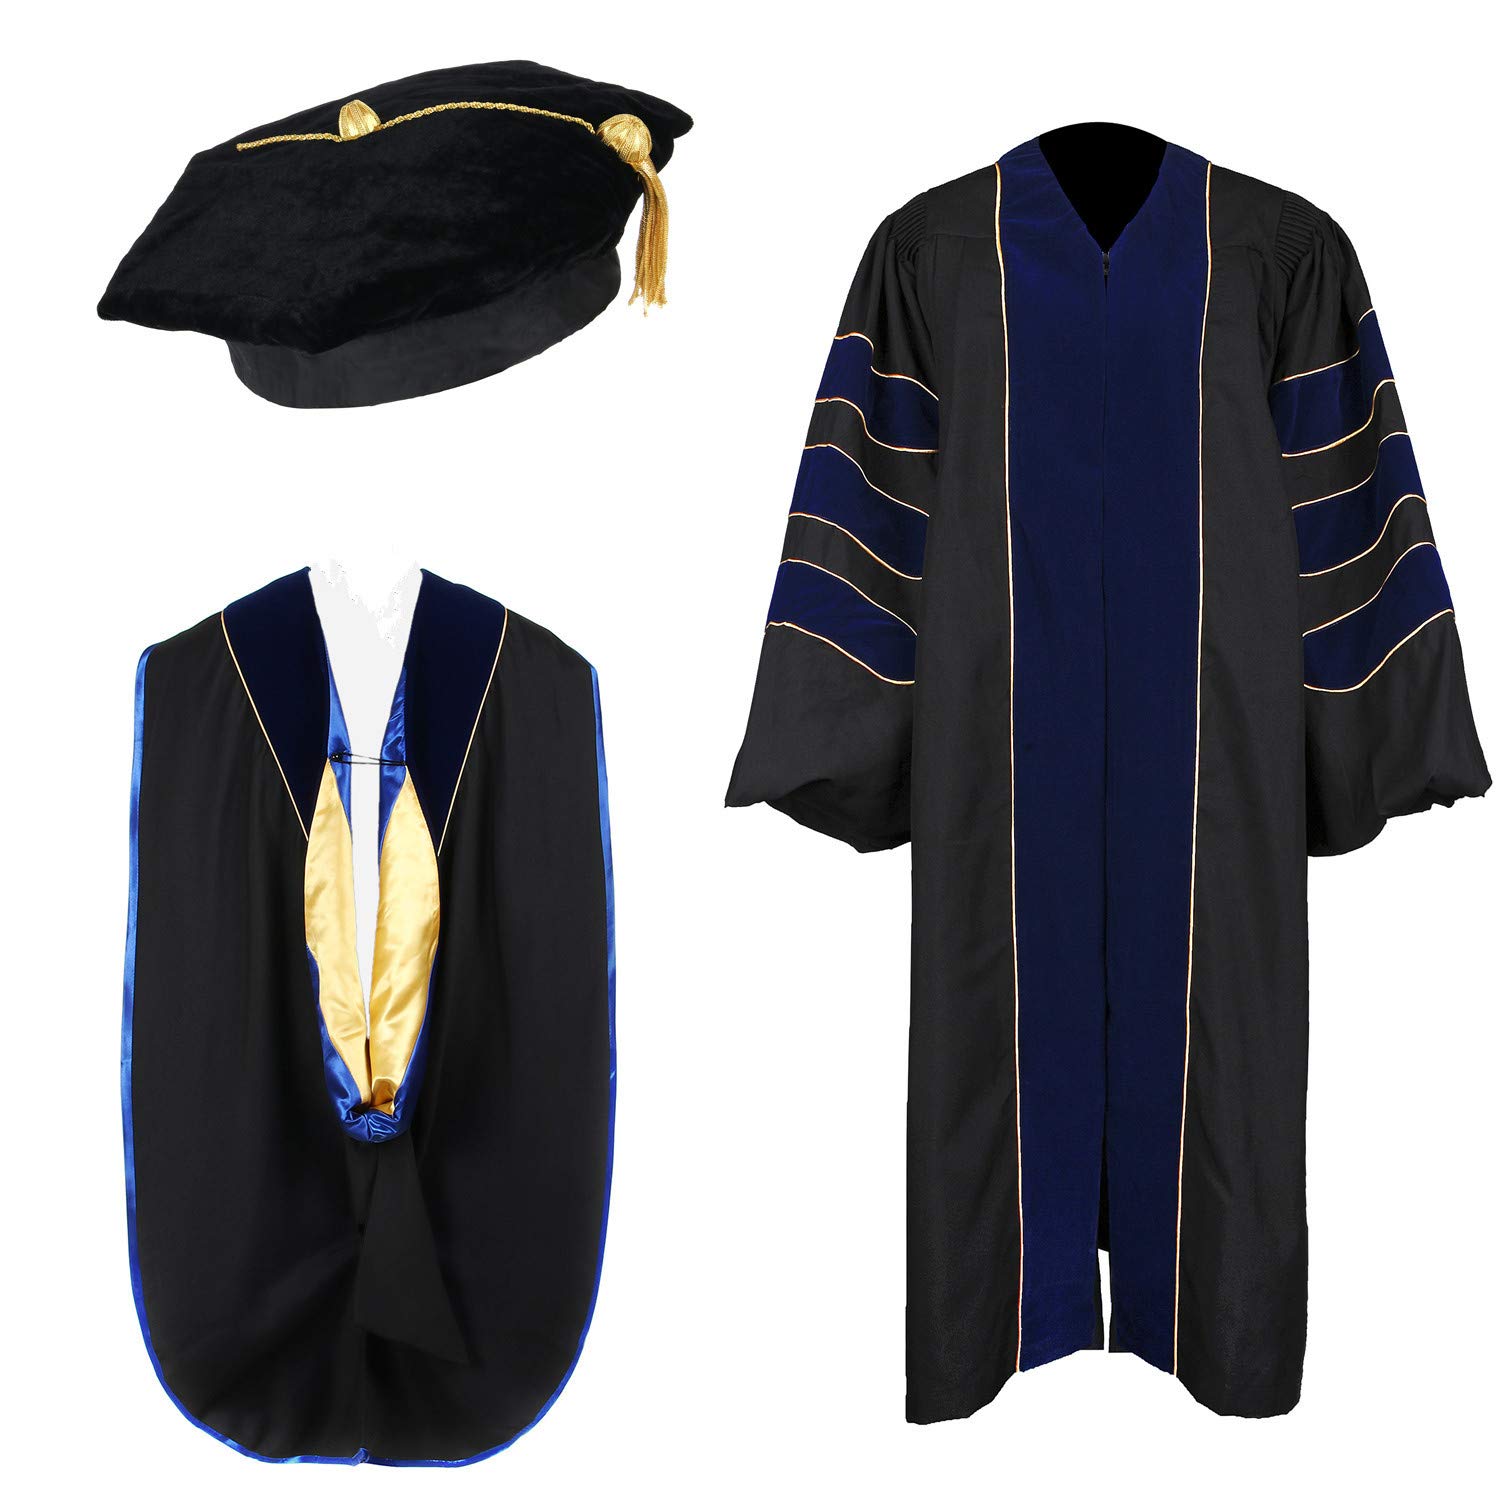 Newrara Unisex Deluxe Doctoral Graduation Gown, Doctoral Hood and Doctoral Tam 8 Sided Package